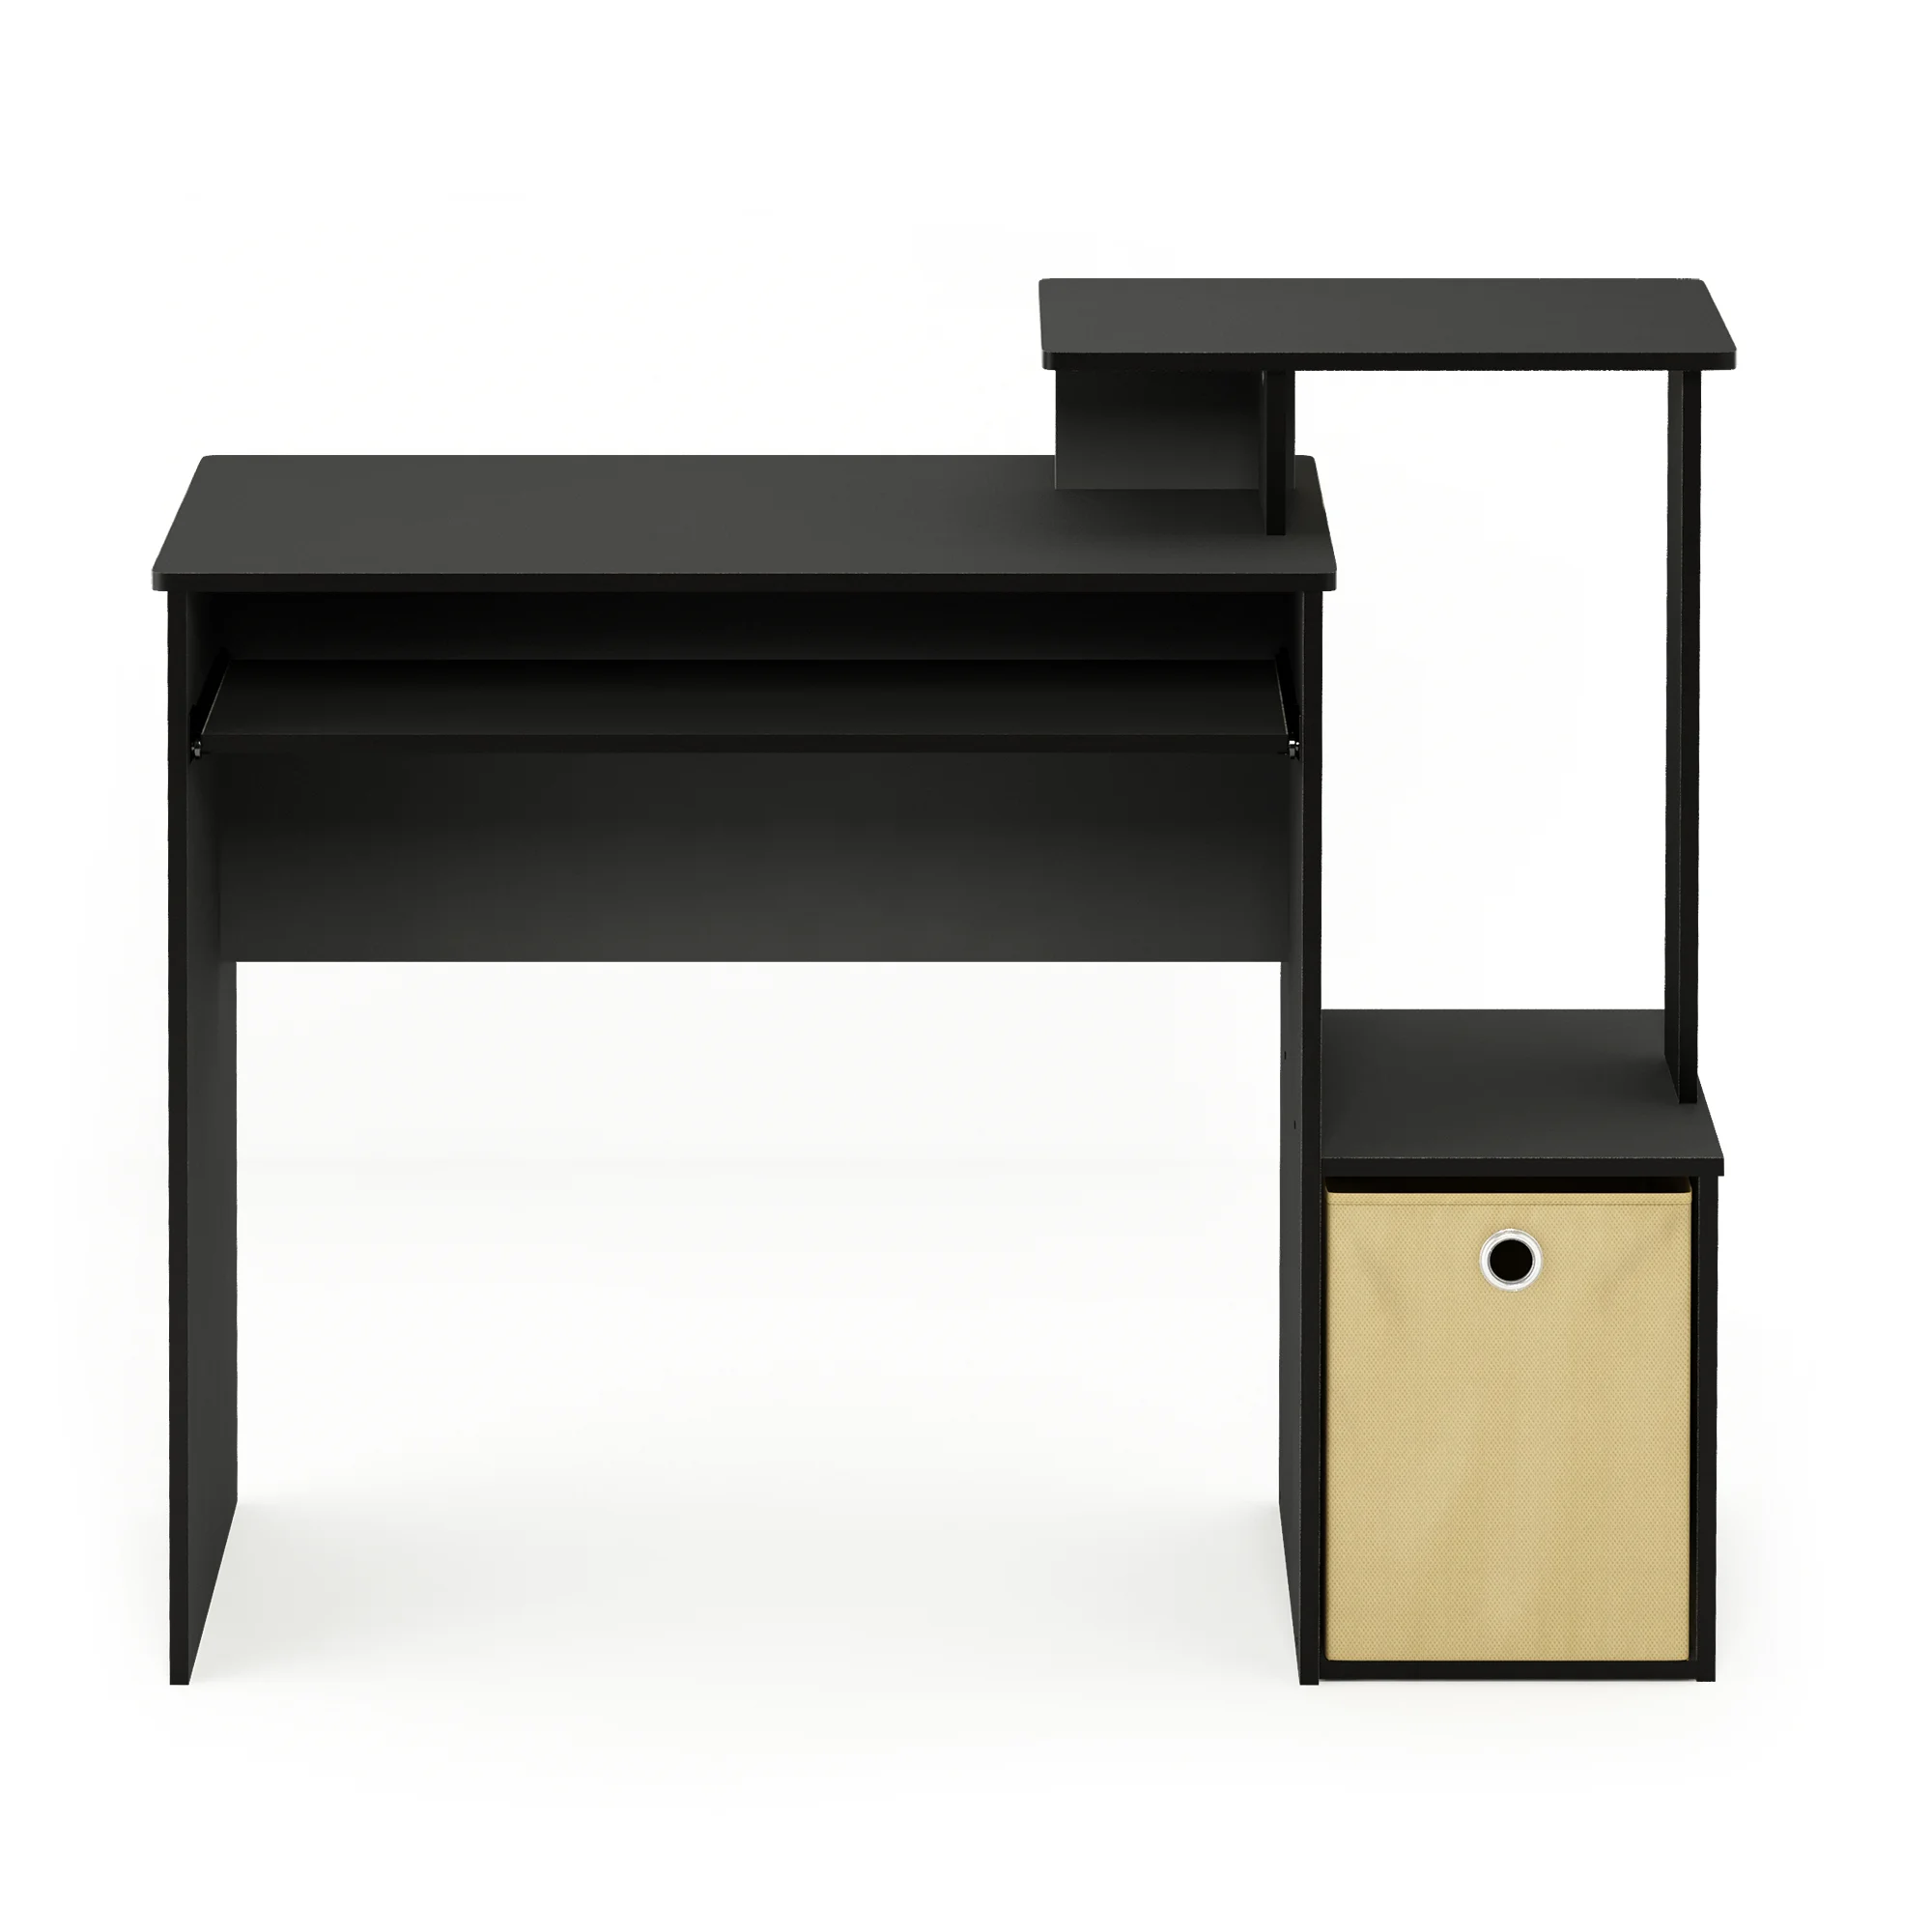 Sonoma Home Office Desk - Available in 3 Colors